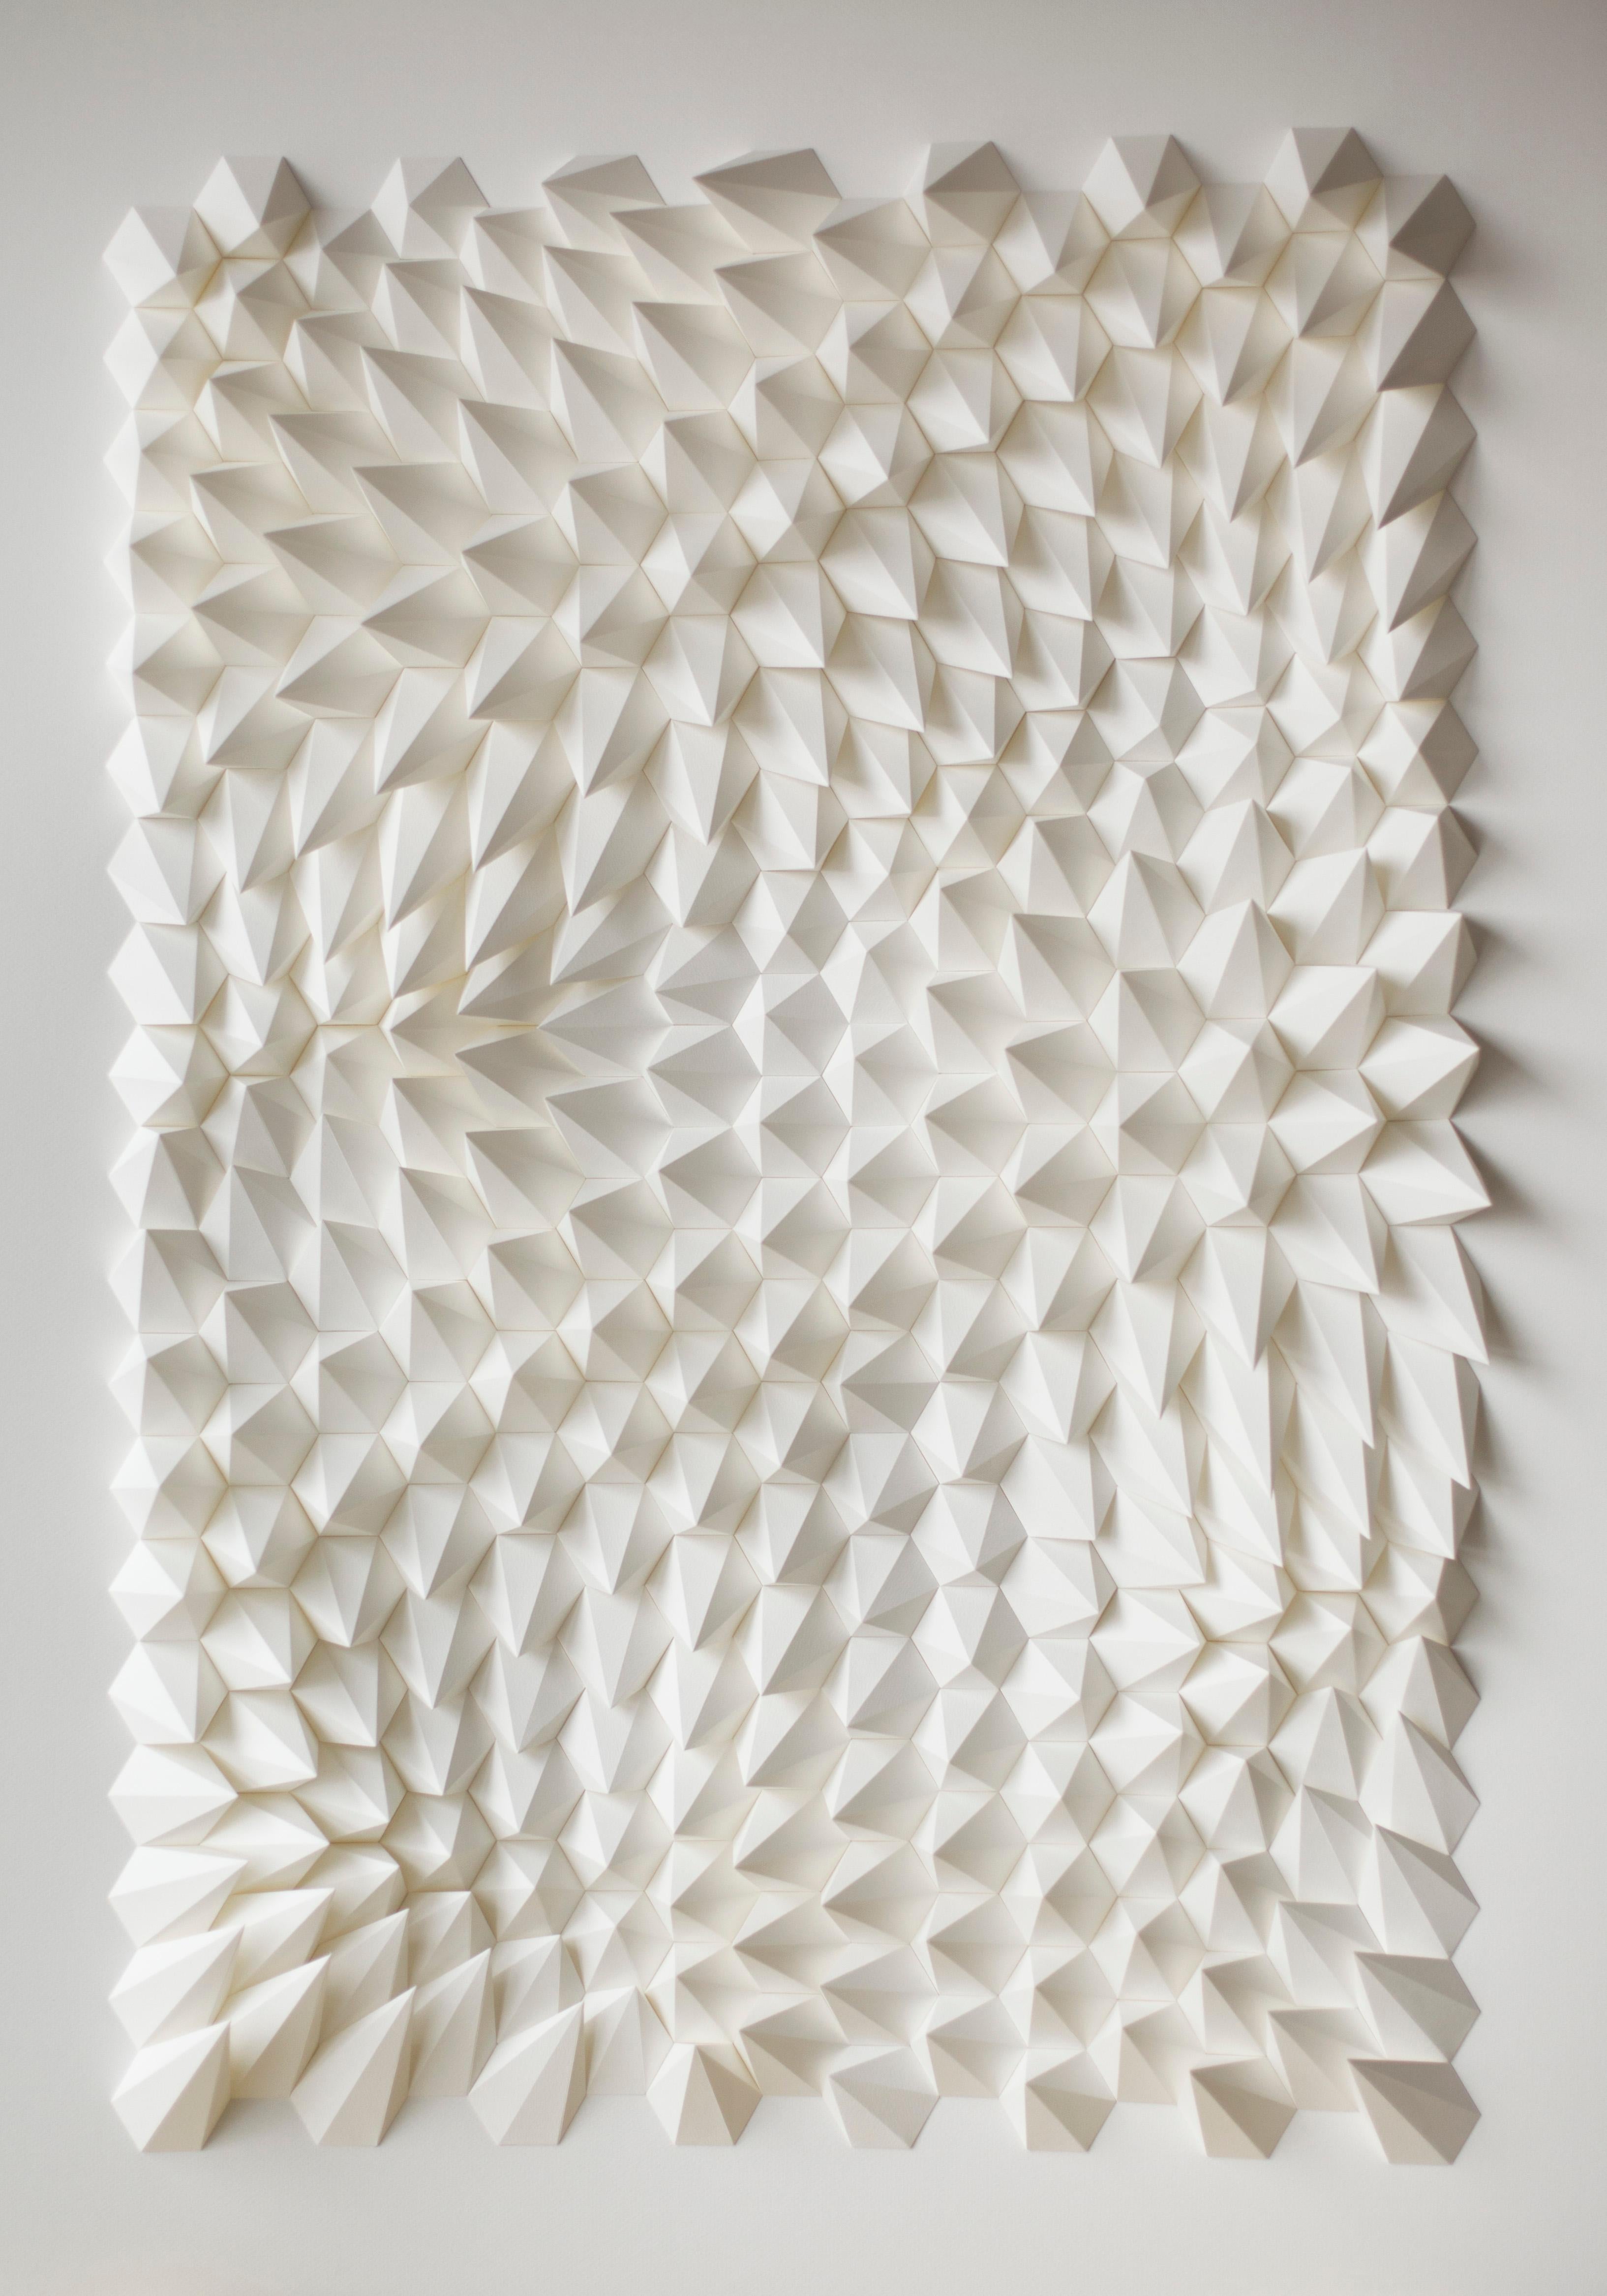 Anna Kruhelska Abstract Drawing - U 136 - white abstract geometric minimalist 3D composition with folded paper 